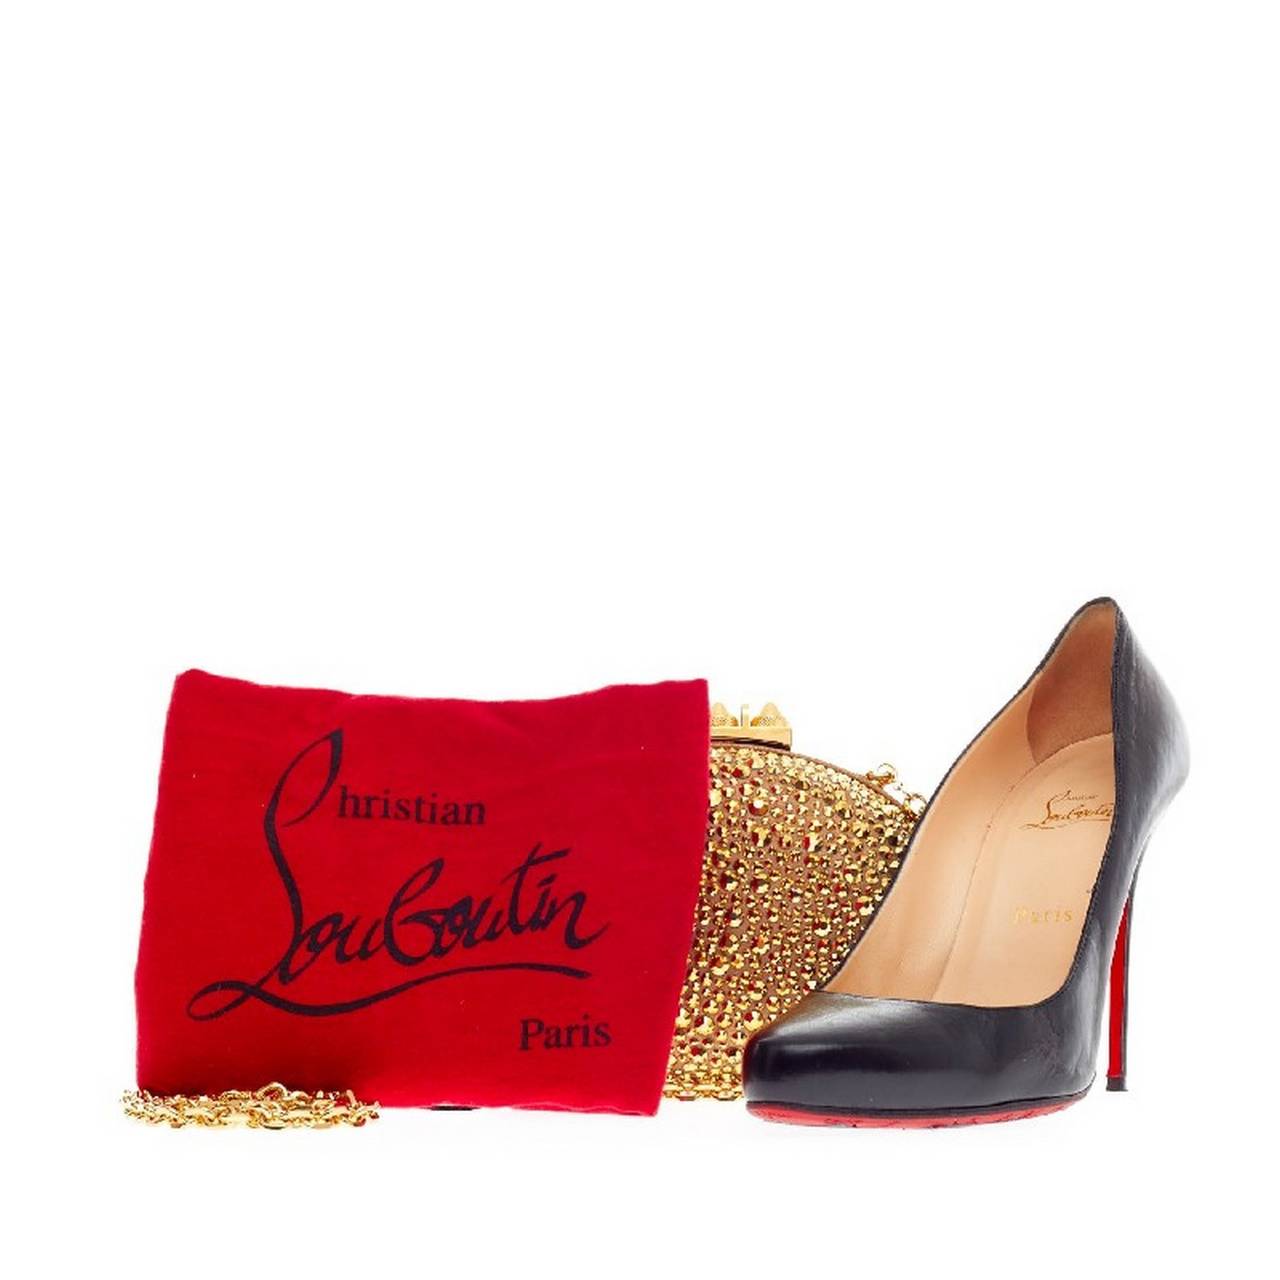 This authentic Christian Louboutin Mina Clutch Strass is a must-have accessory for any formal or evening event. Decorated in sparkling luminescent gold crystal embellishment, this eye-catching rounded clutch features gold-hardware accents and a